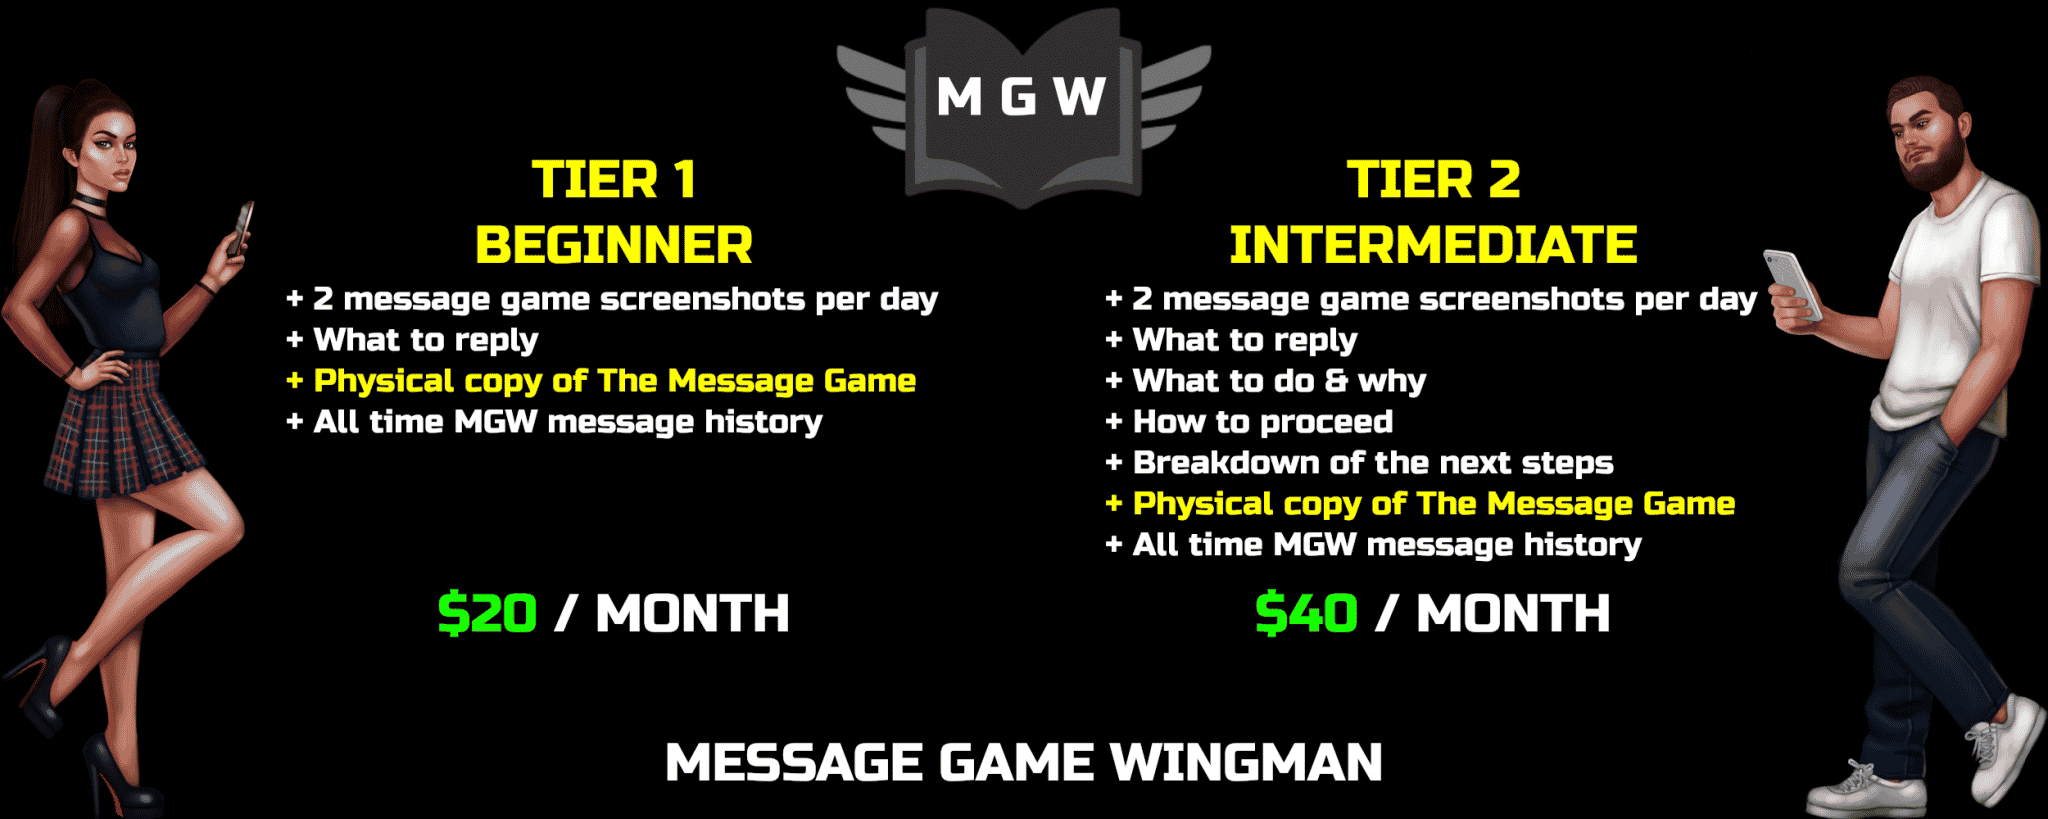 Message Game Wingman MGW Ice White Textgame Text Game Tinder Screenshots